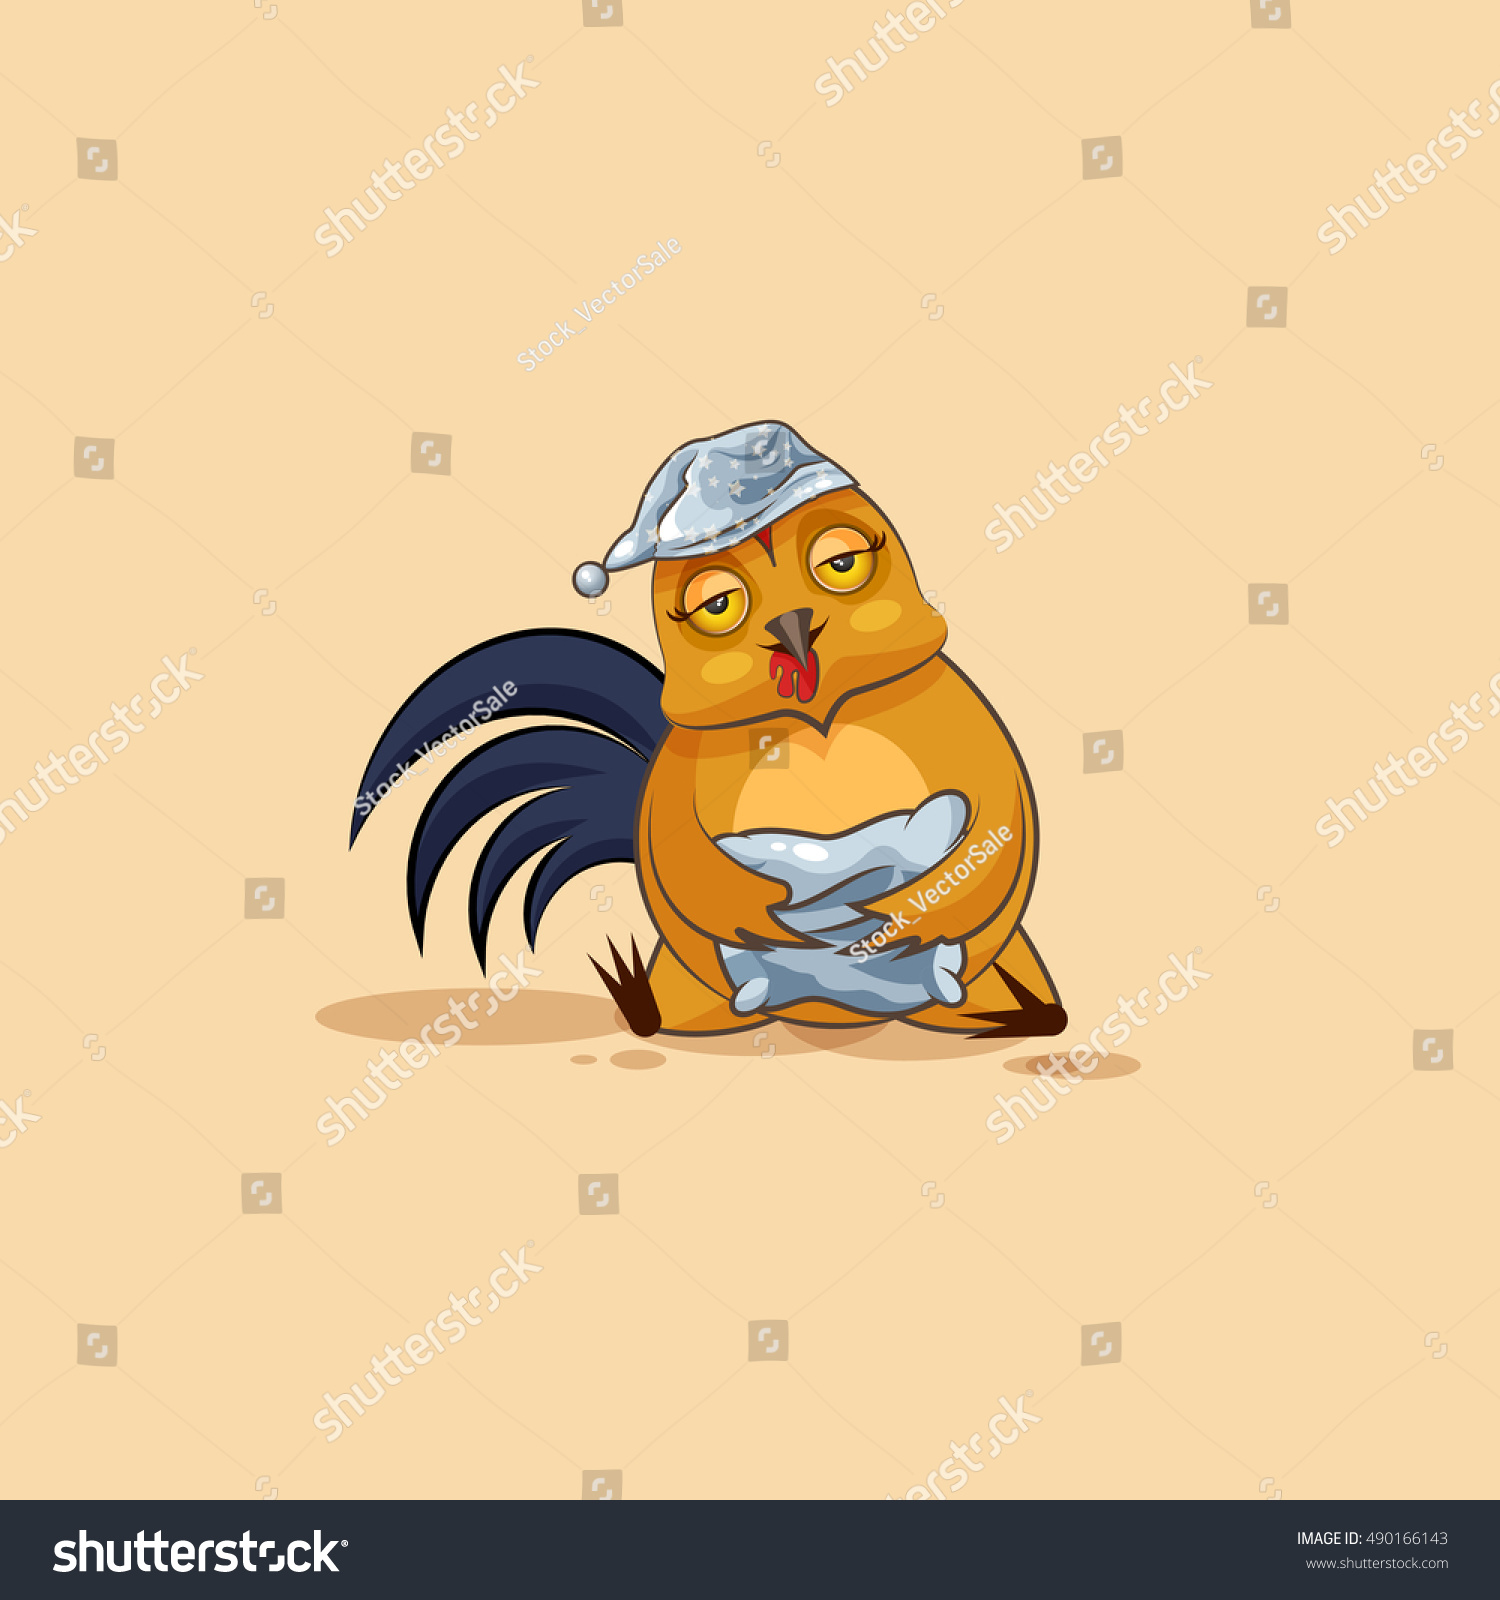 SVG of Vector Stock Illustration isolated Emoji character cartoon sleepy Cock in nightcap with pillow sticker emoticon for site, info graphics, video, animation, websites, mails, newsletters, reports, comics svg